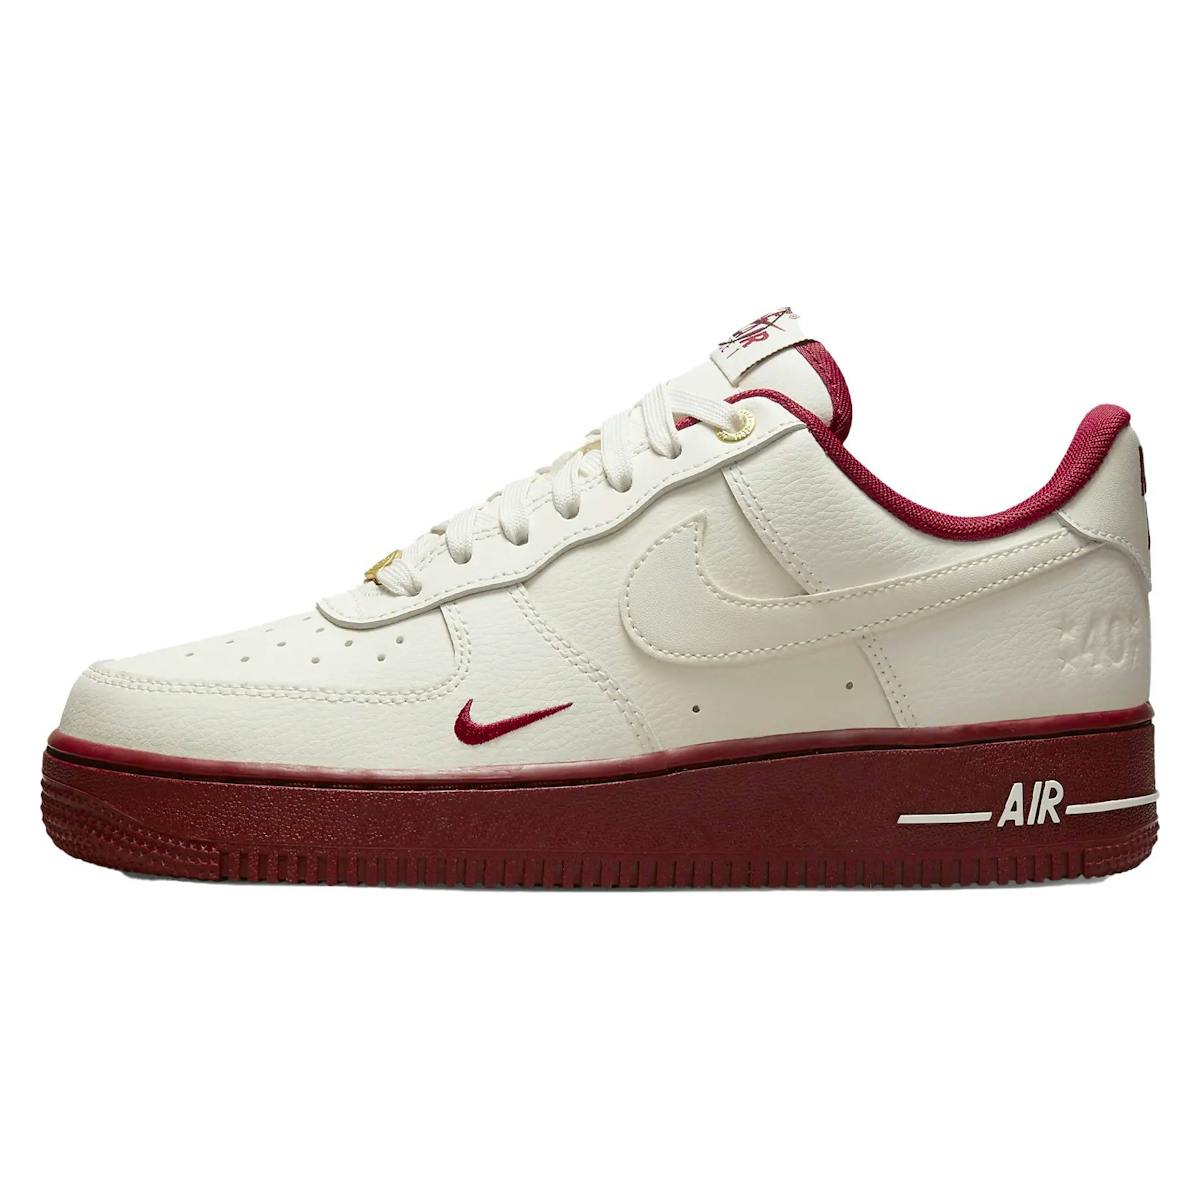 Nike Air Force 1 '07 SE "Team Red"